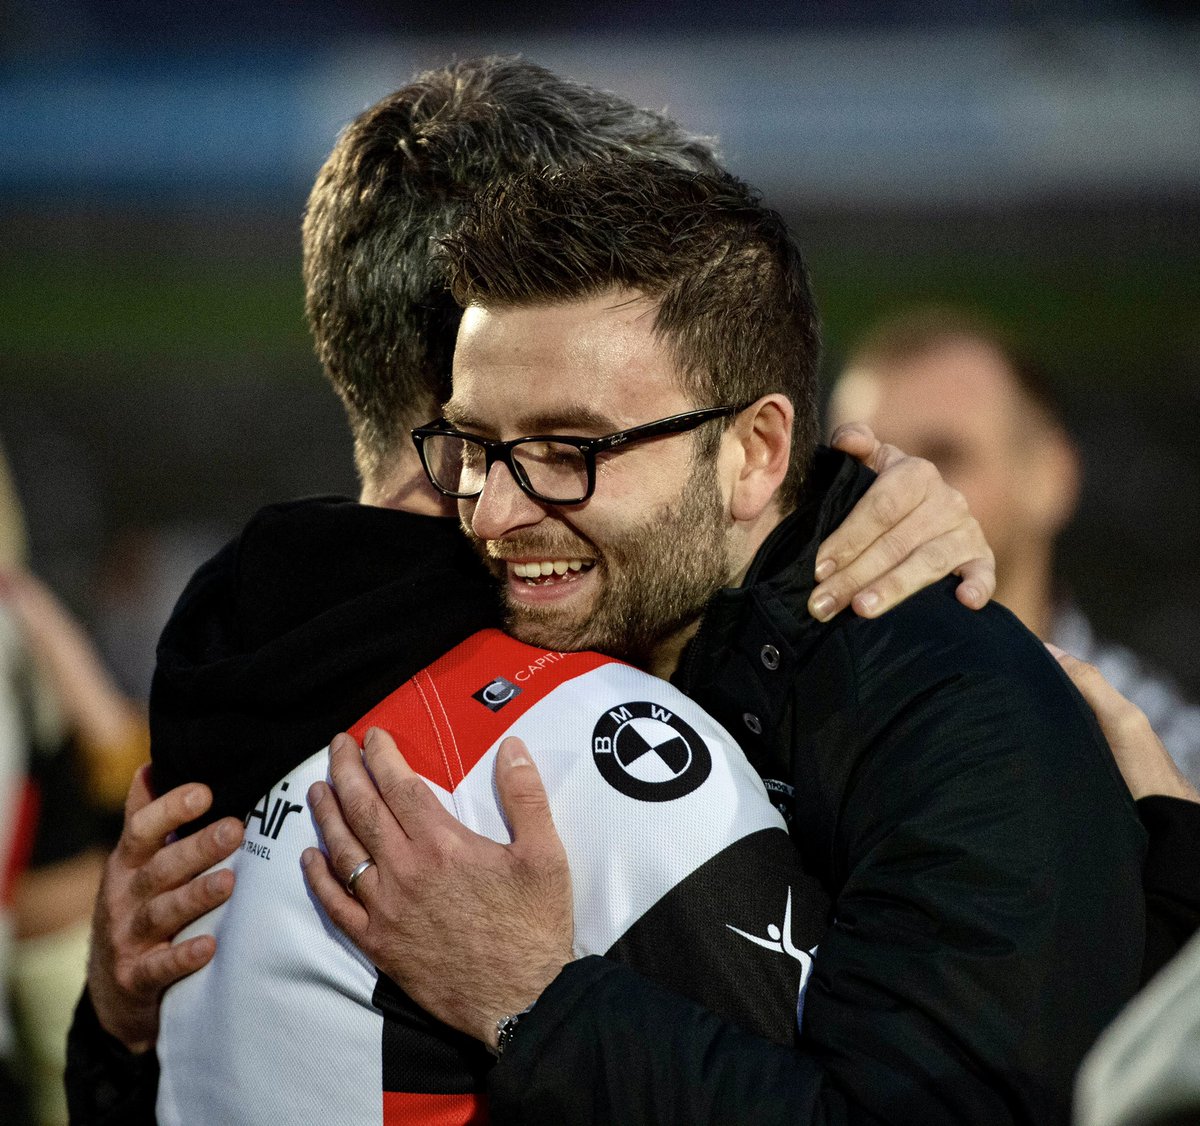 It’s time to say goodbye to @PontypoolRFC. I’m grateful for all the kindness, patience and support I’ve received over the last ten years. Welsh rugby has been a big part of my life. I’ll miss it, but it’s time for a new challenge. Until next time, thank you for everything. 🇾🇪